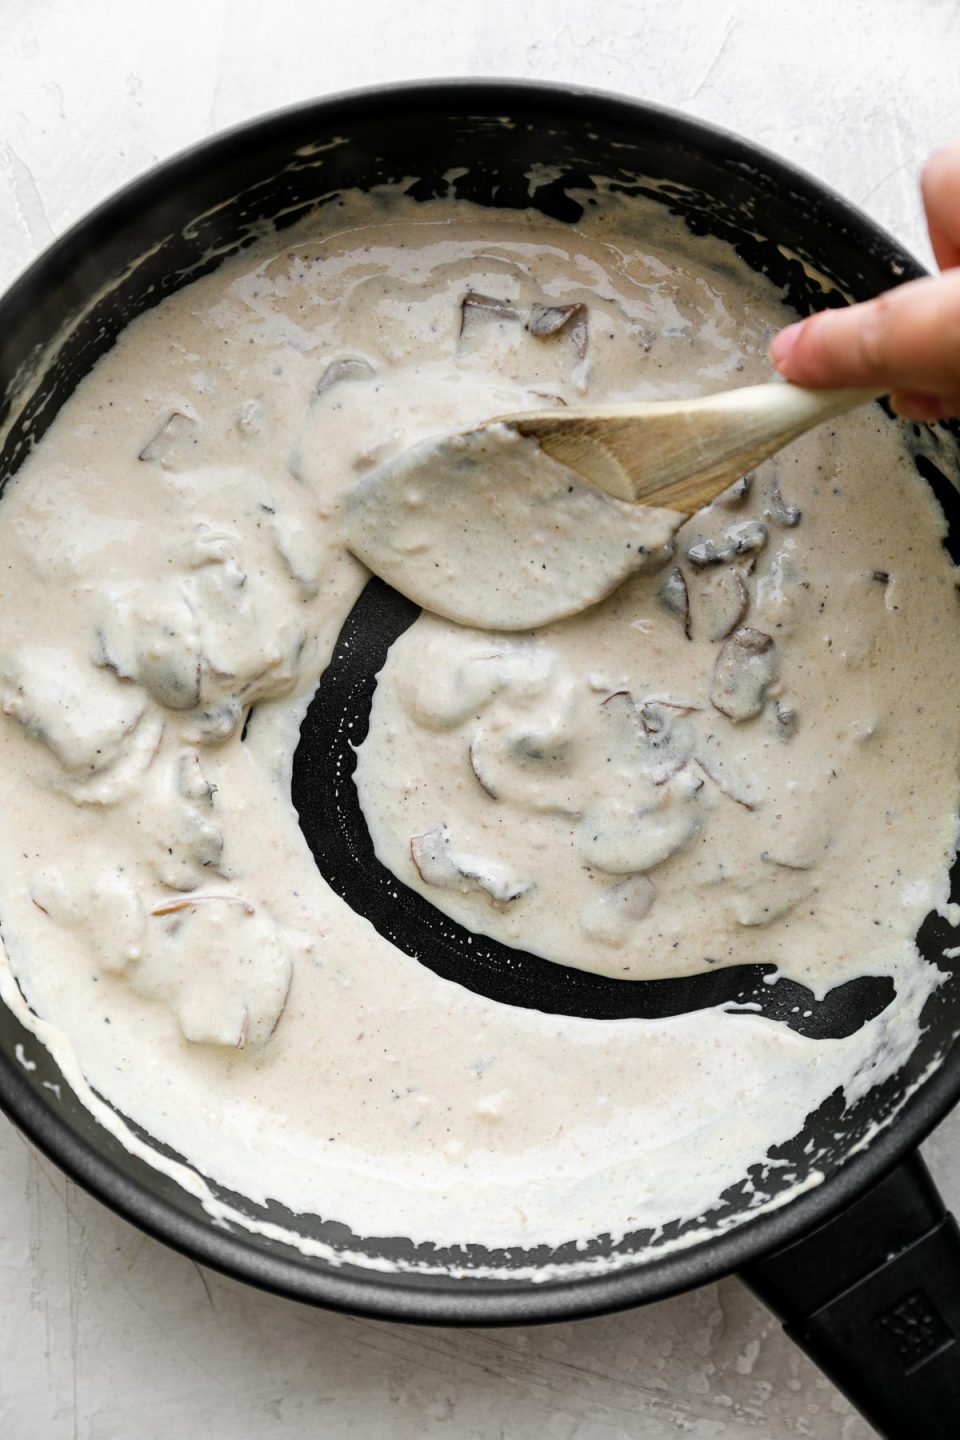 A black skillet is filled with a creamy mushroom sauce and a woman's hand holds a wooden spoon as she works to stir the sauce. The skillet sits atop a creamy white plaster surface.